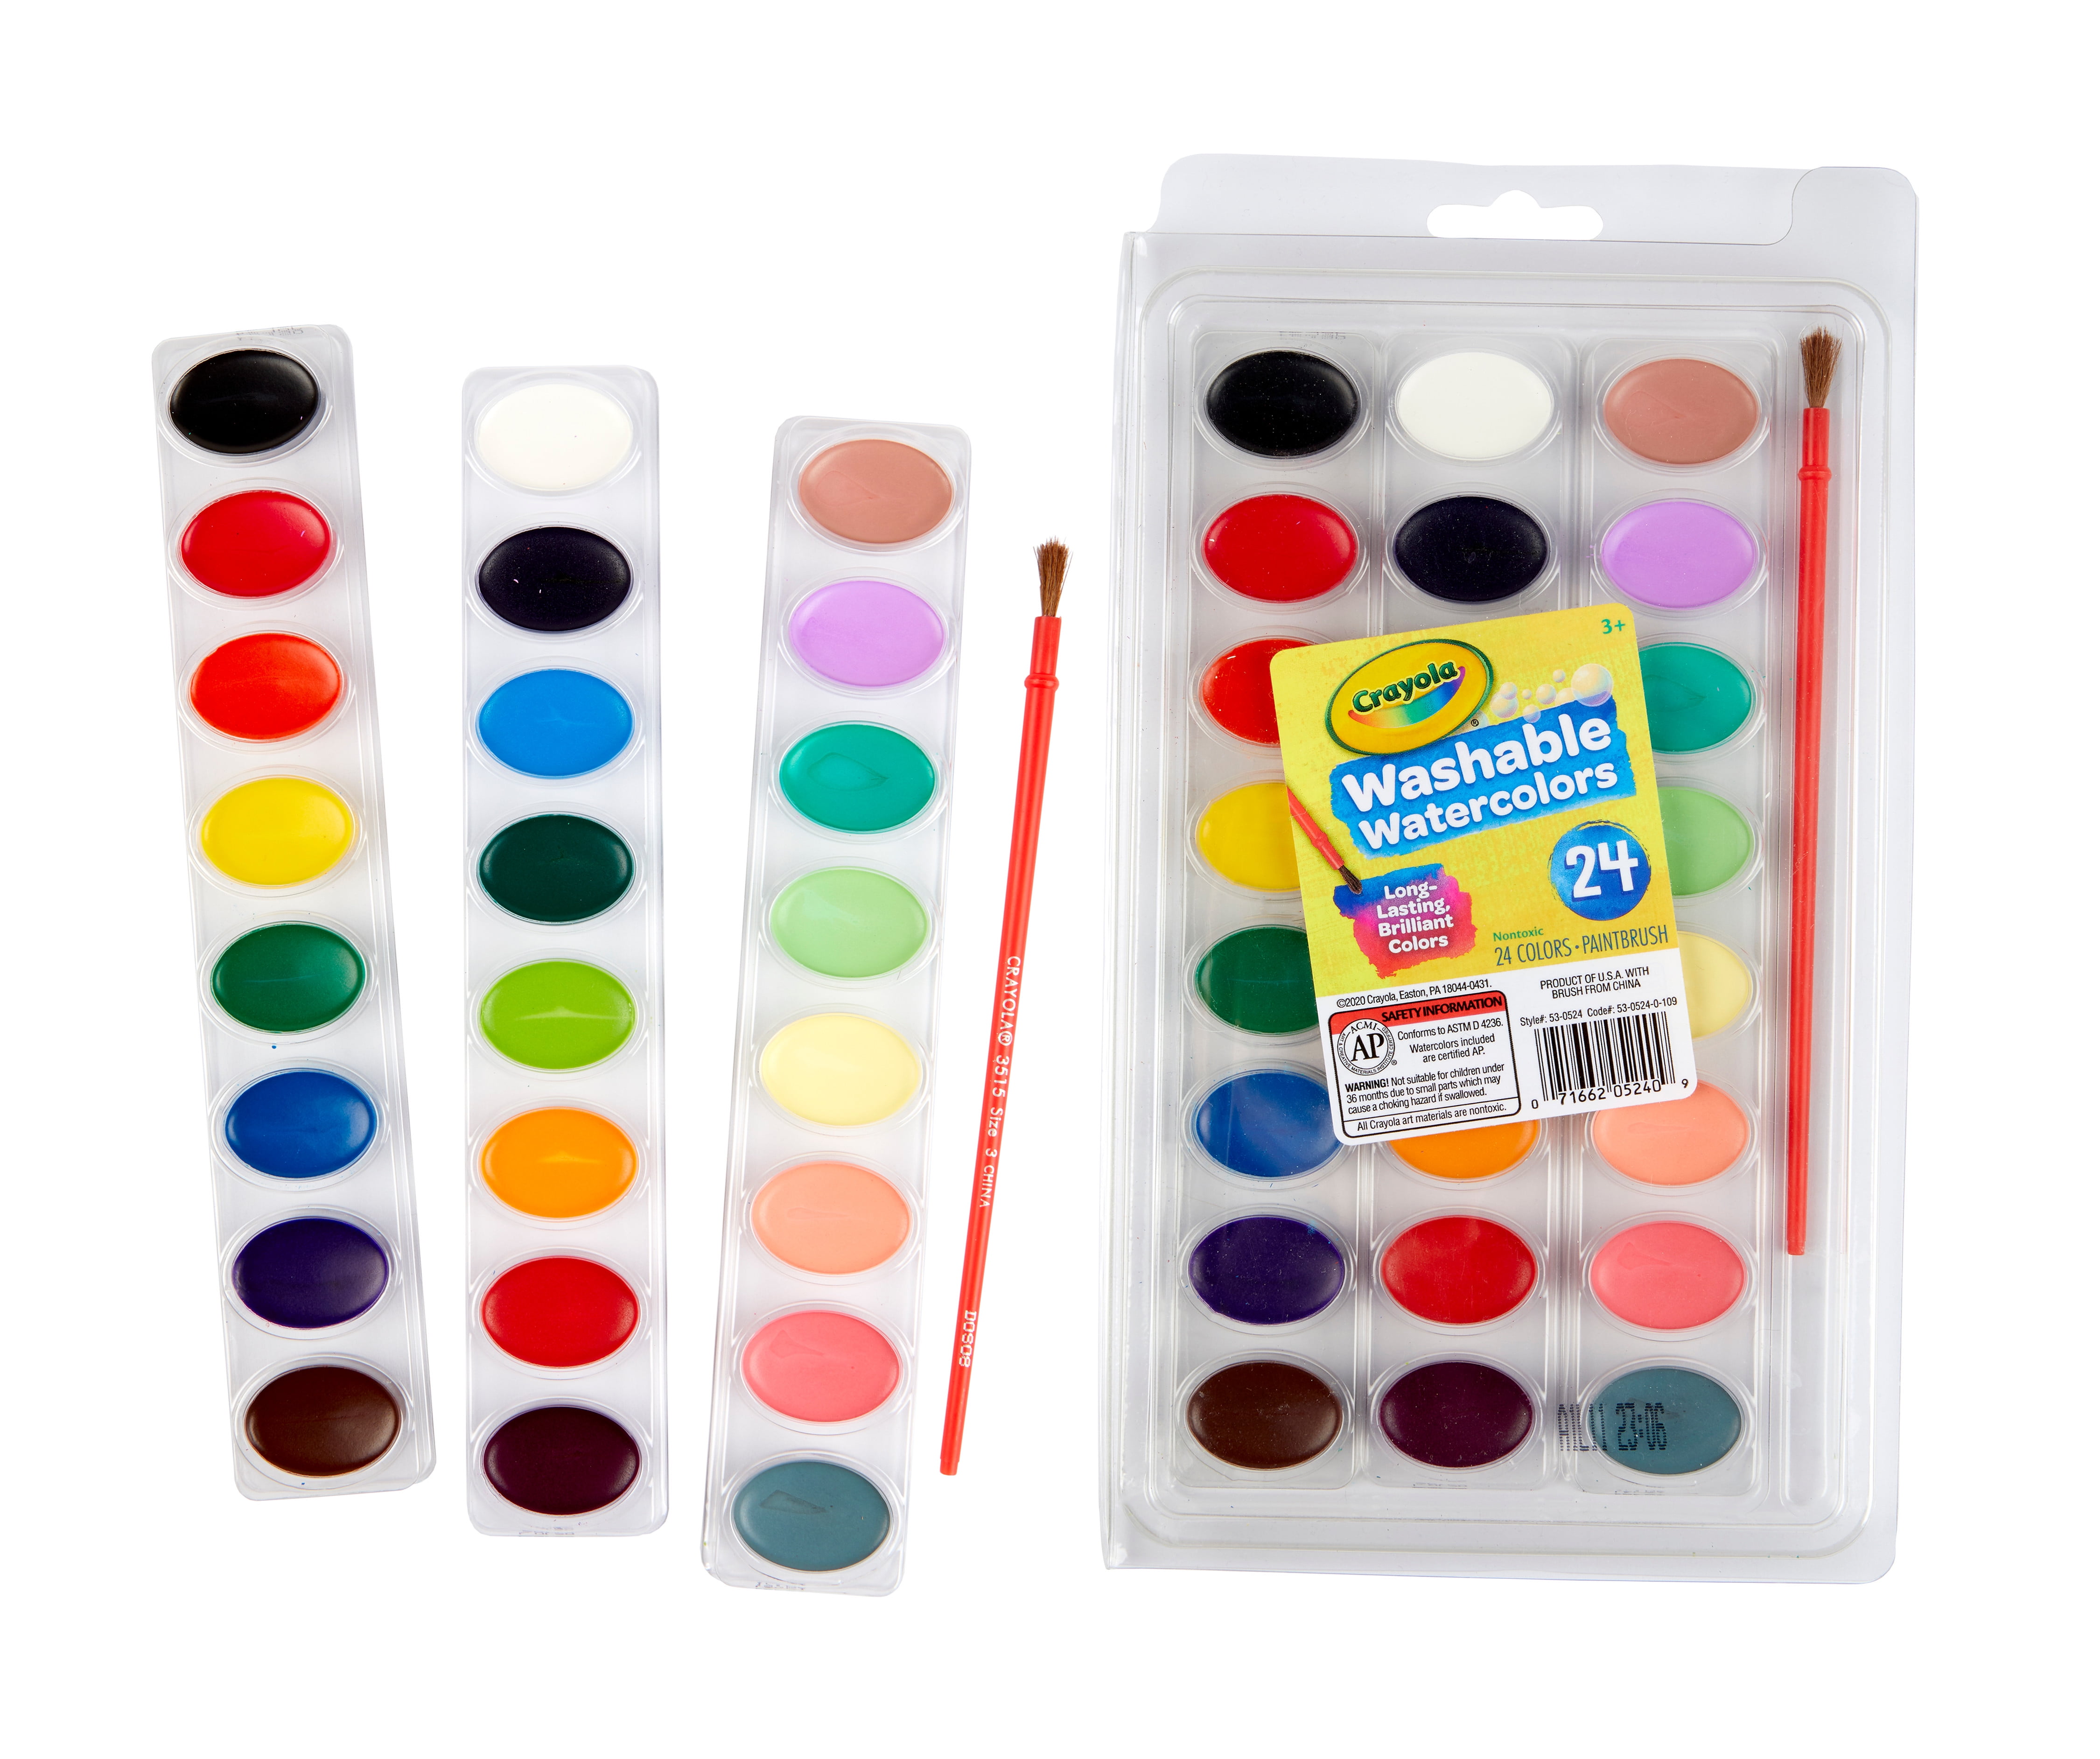 Crayola Washable Watercolor 24 Color Paint Set, 1 ct - Fry's Food Stores